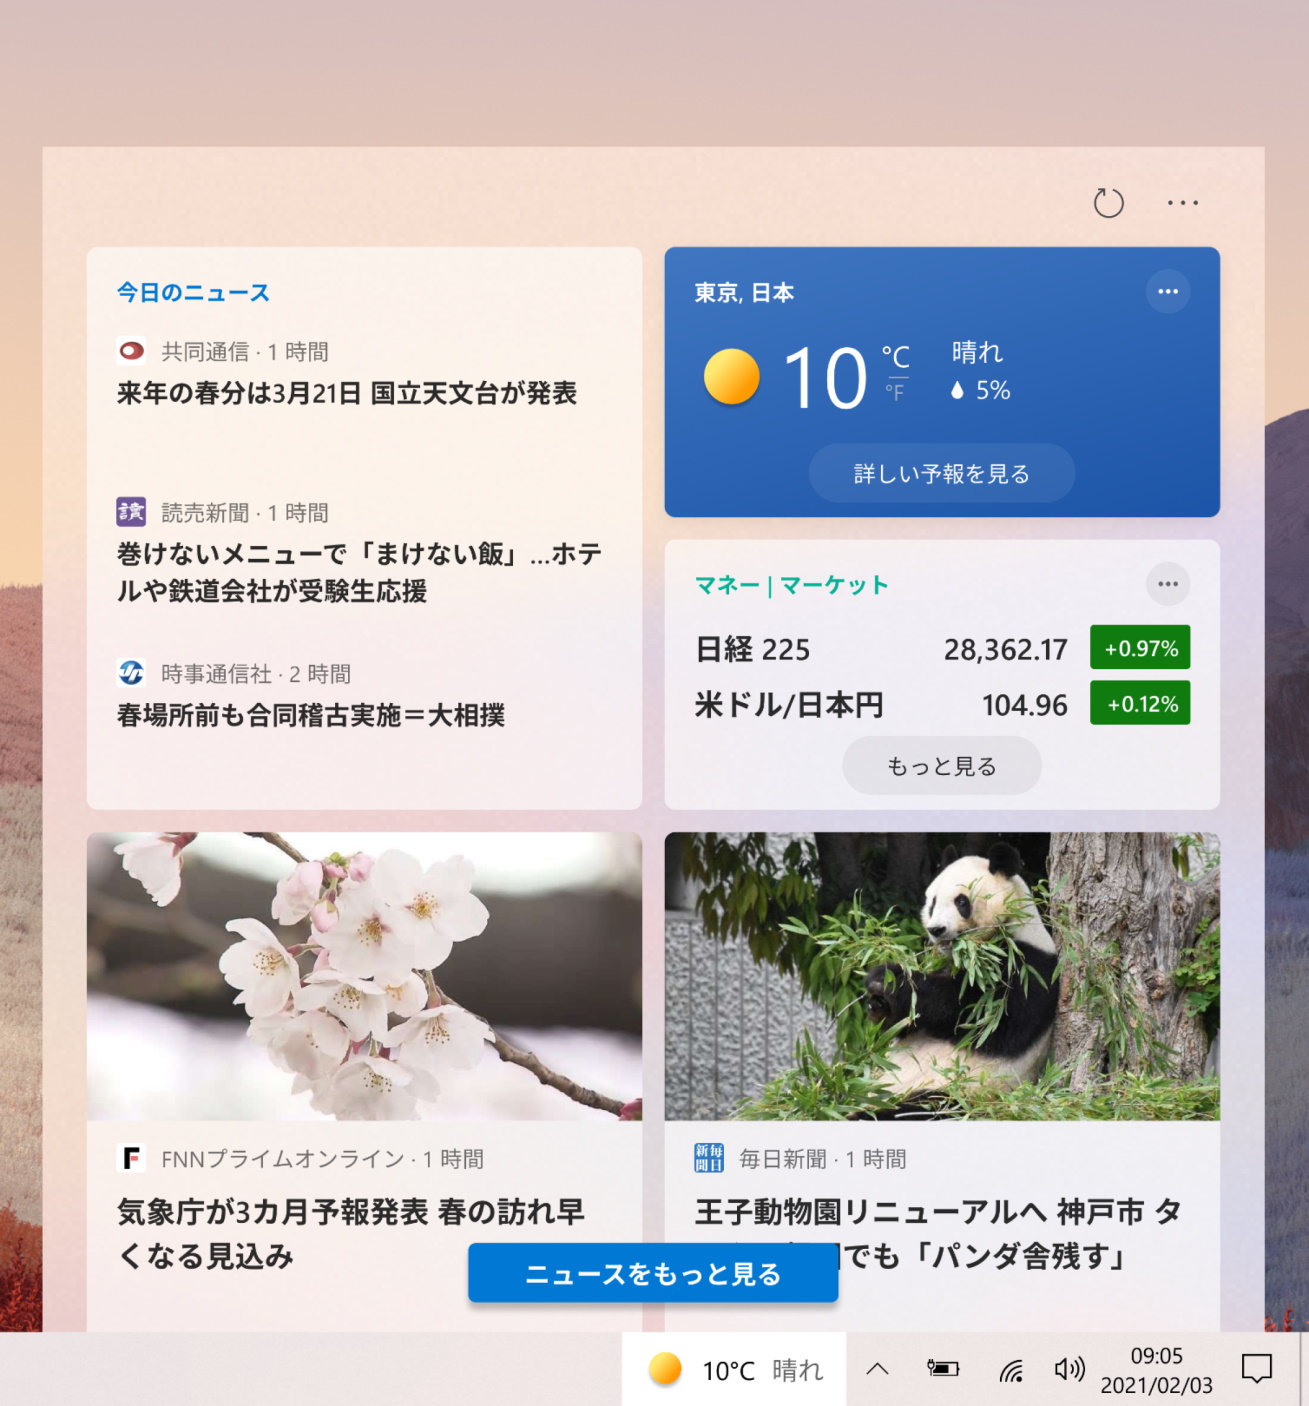 News and interests on the Windows taskbar as seen from a Windows Insider’s PC in Japan.